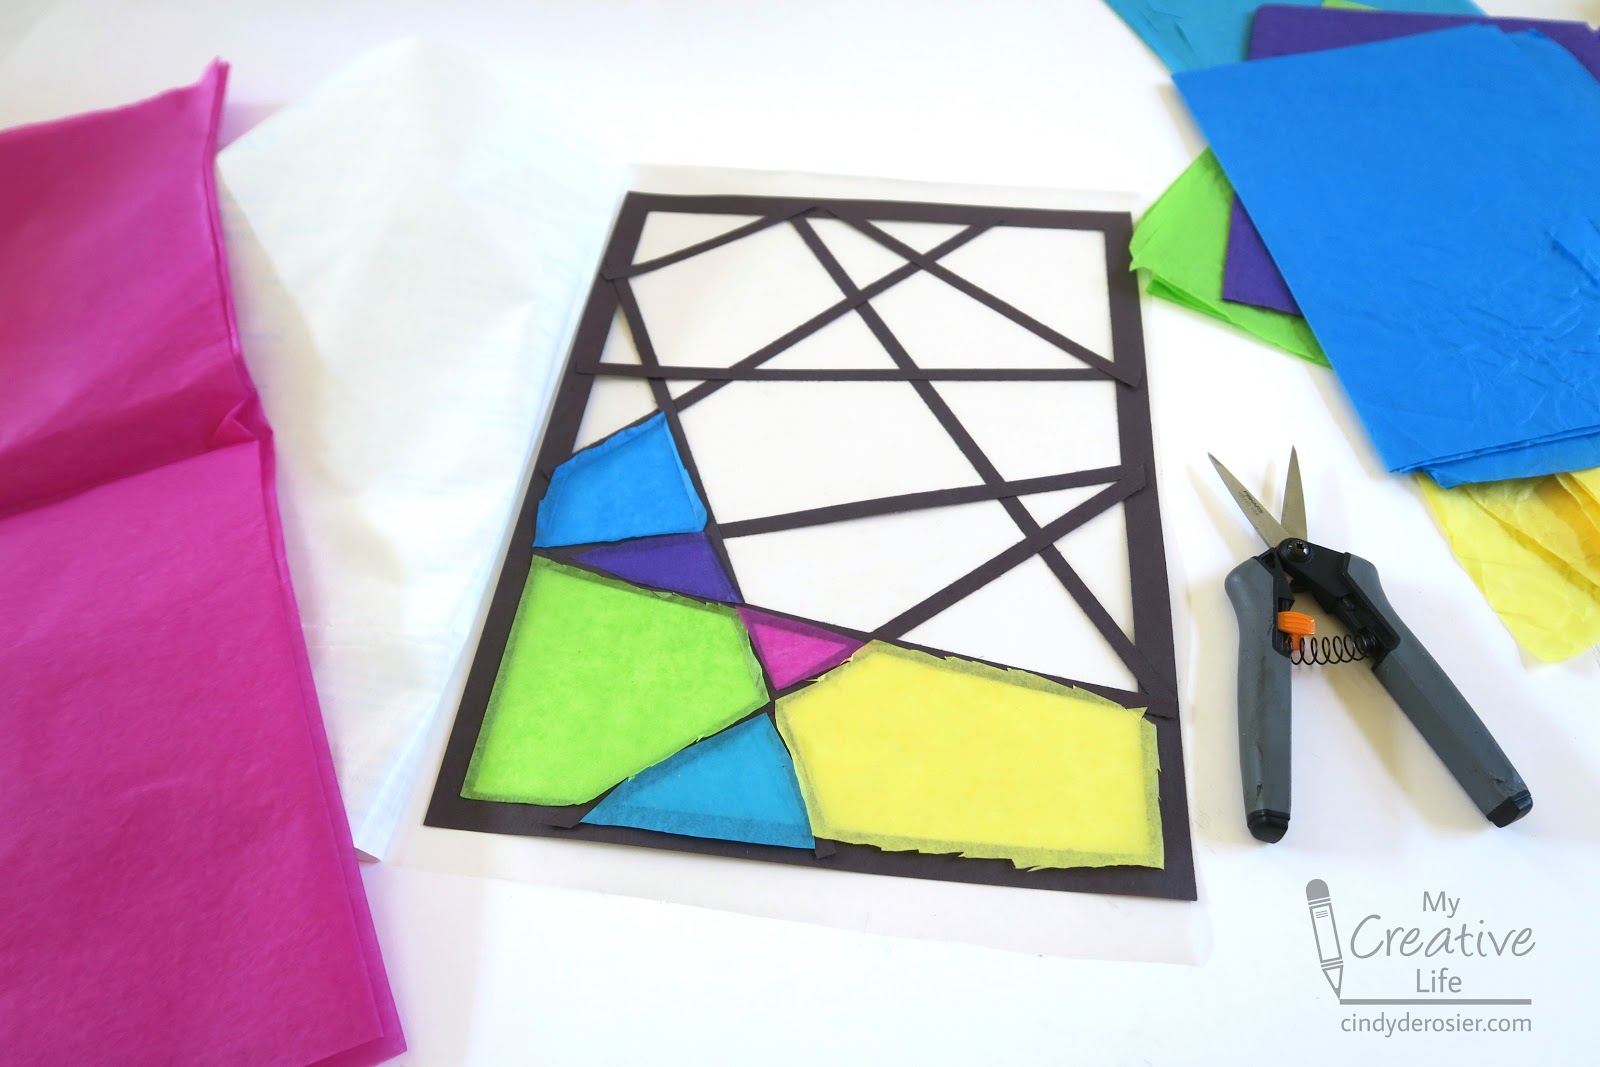 Tissue Paper Stained Glass, Crafts for Kids